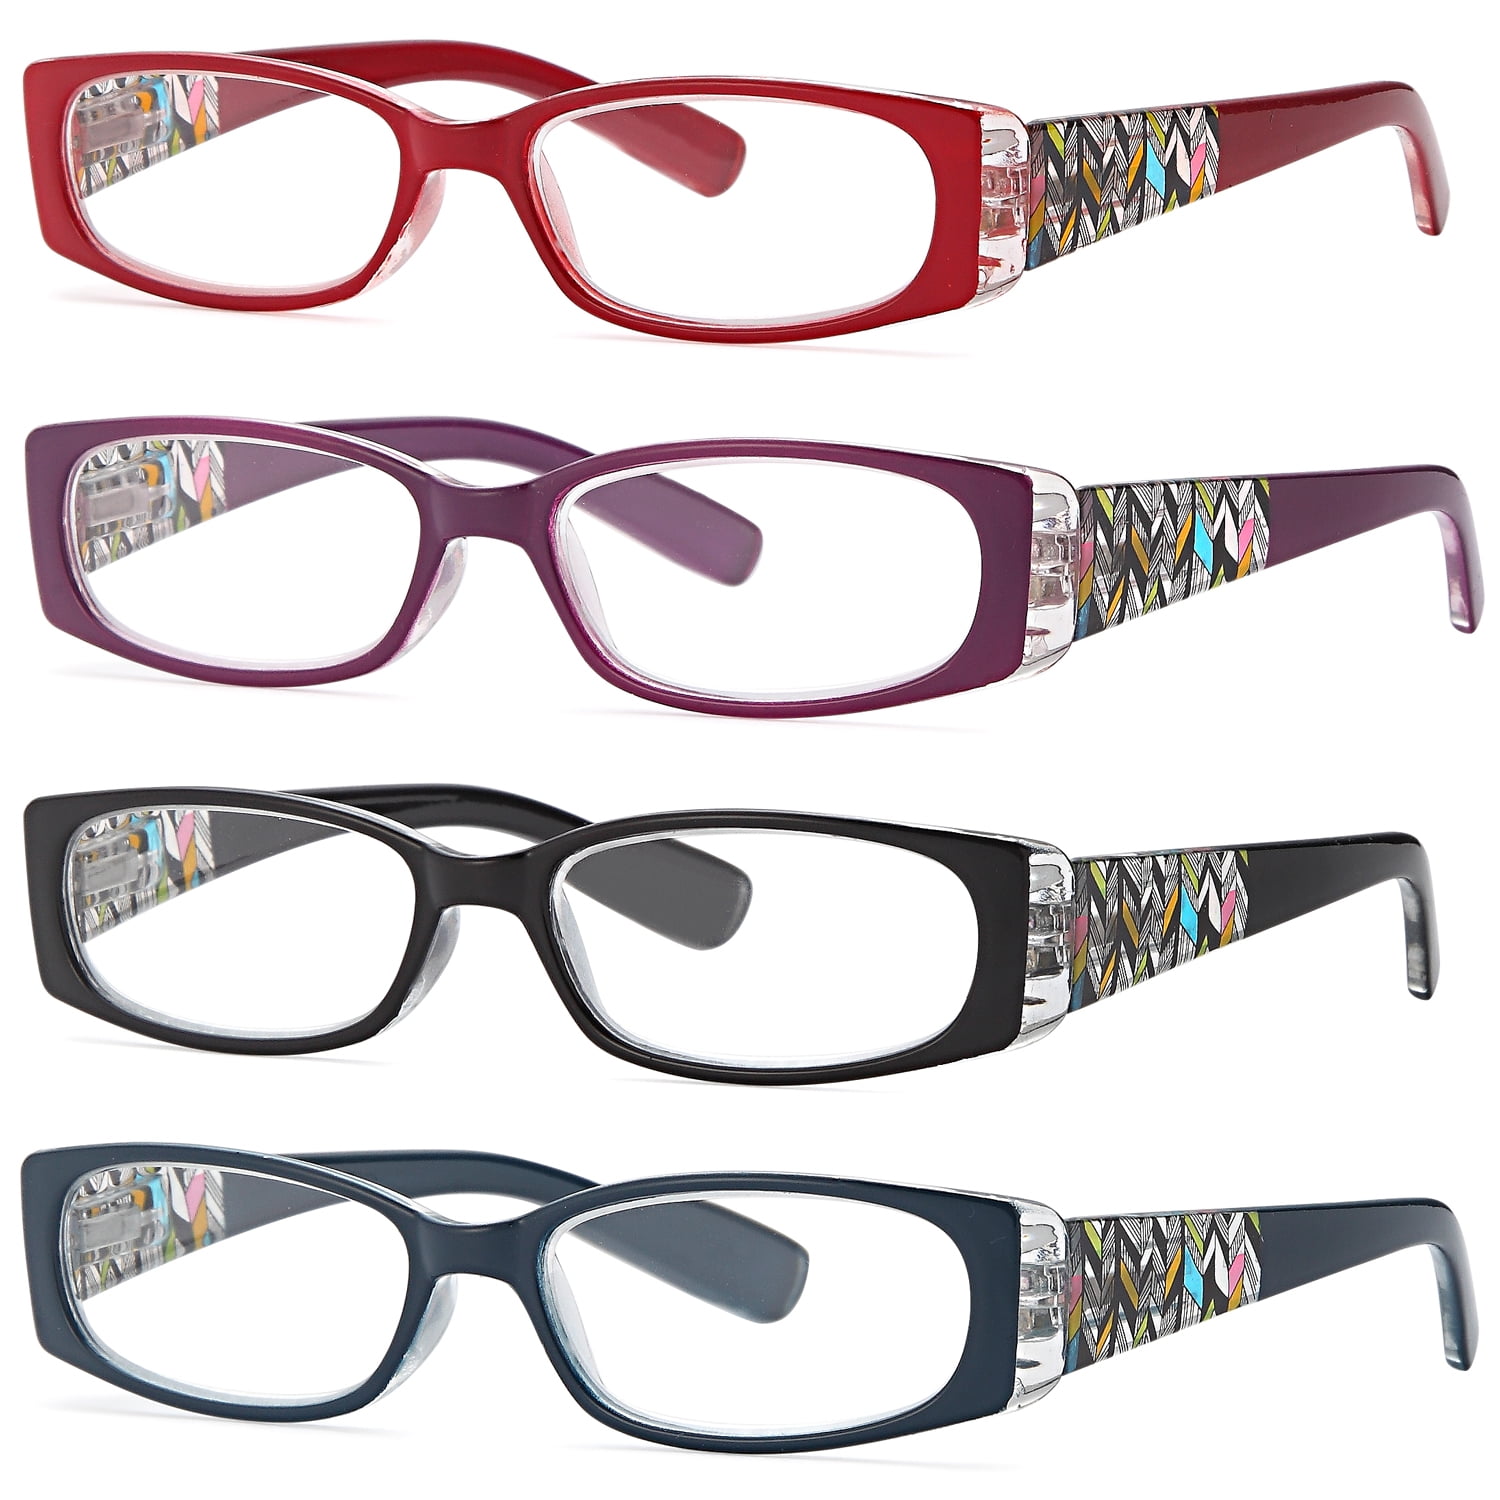 EYEGUARD Readers 4 Pack of Thin and Elegant Womens Reading Glasses with Beautiful Patterns for Ladies 1.50 